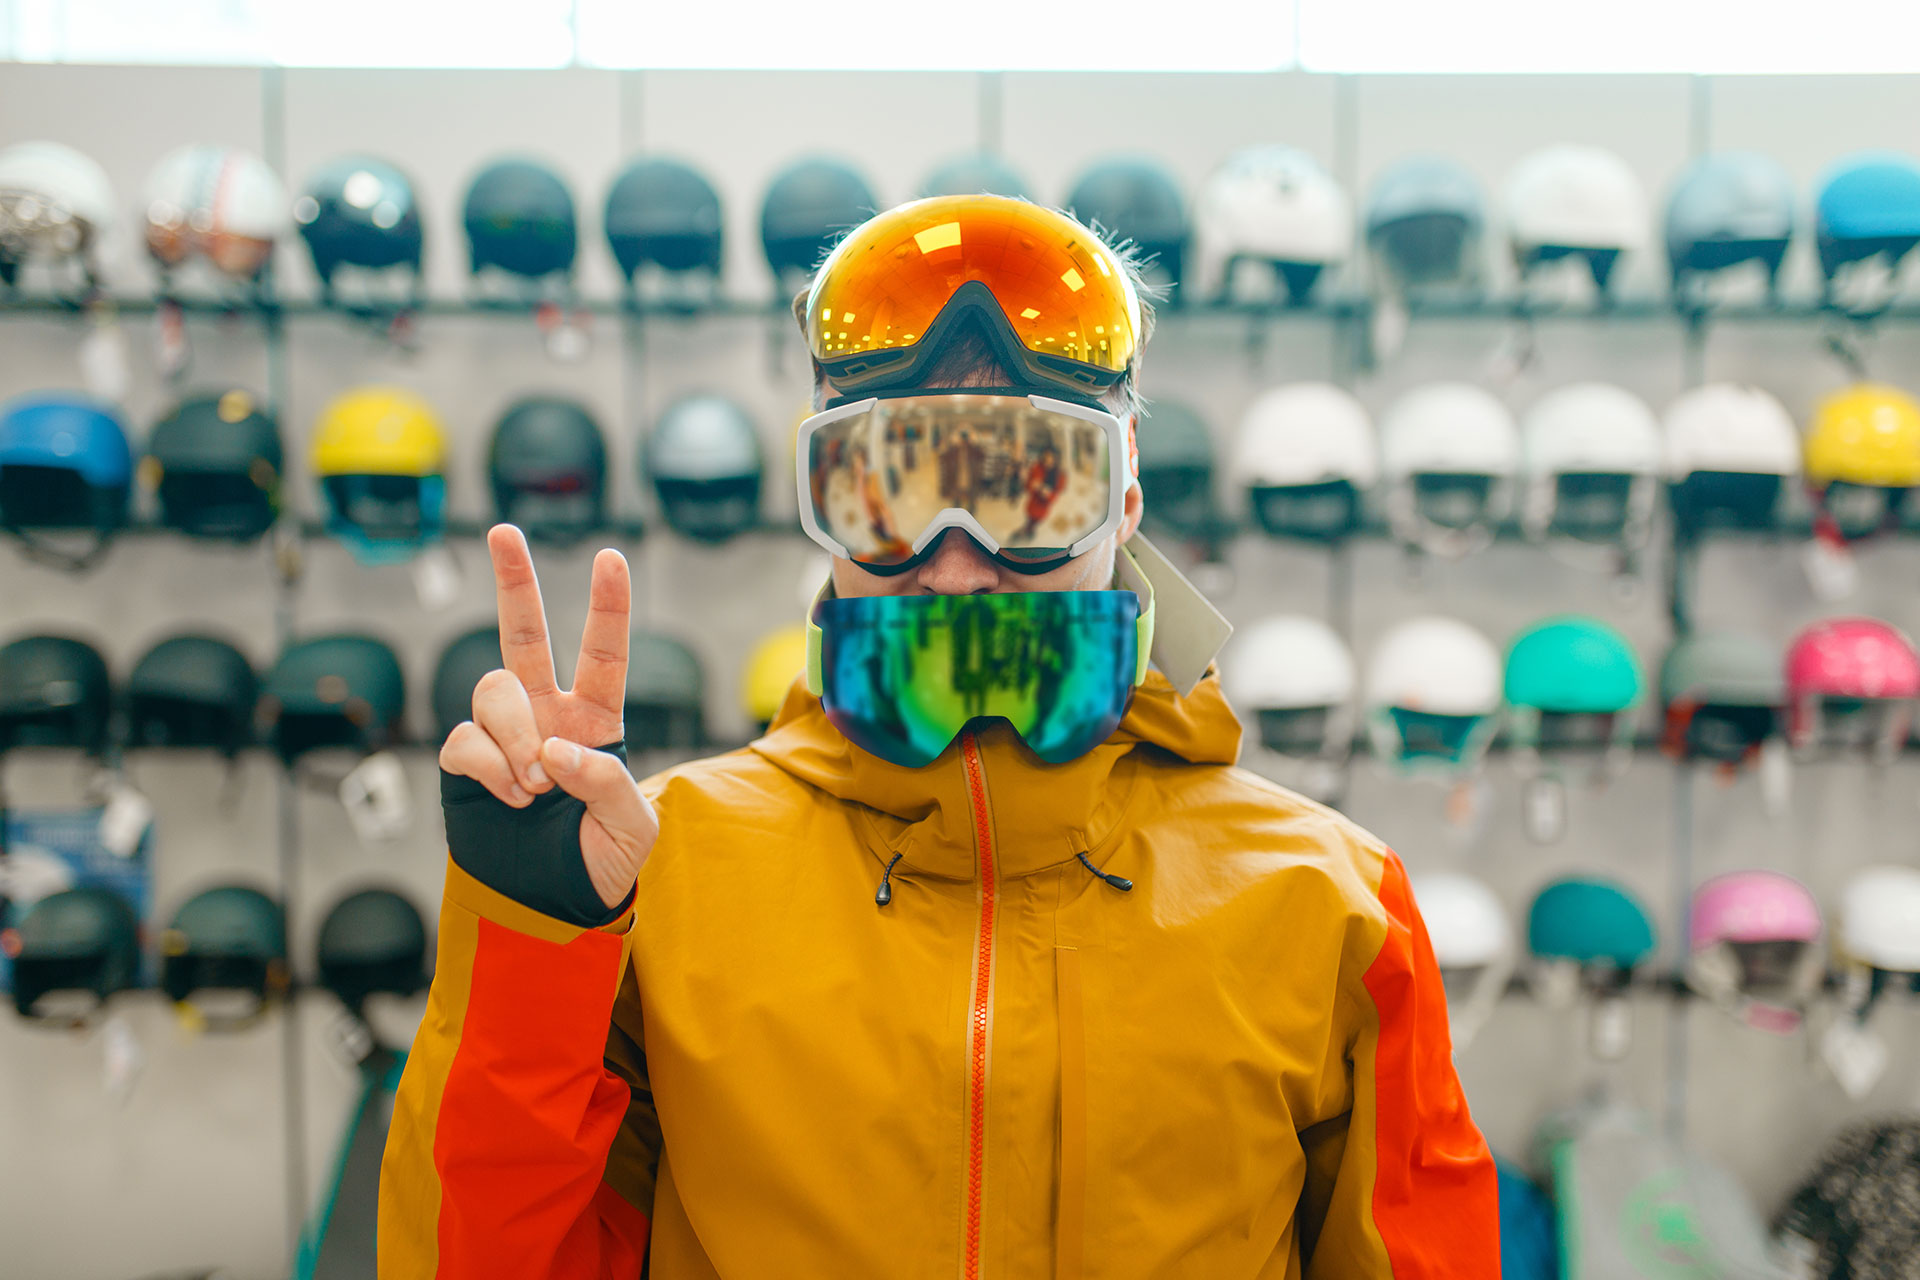 Ski Clothes and Gear